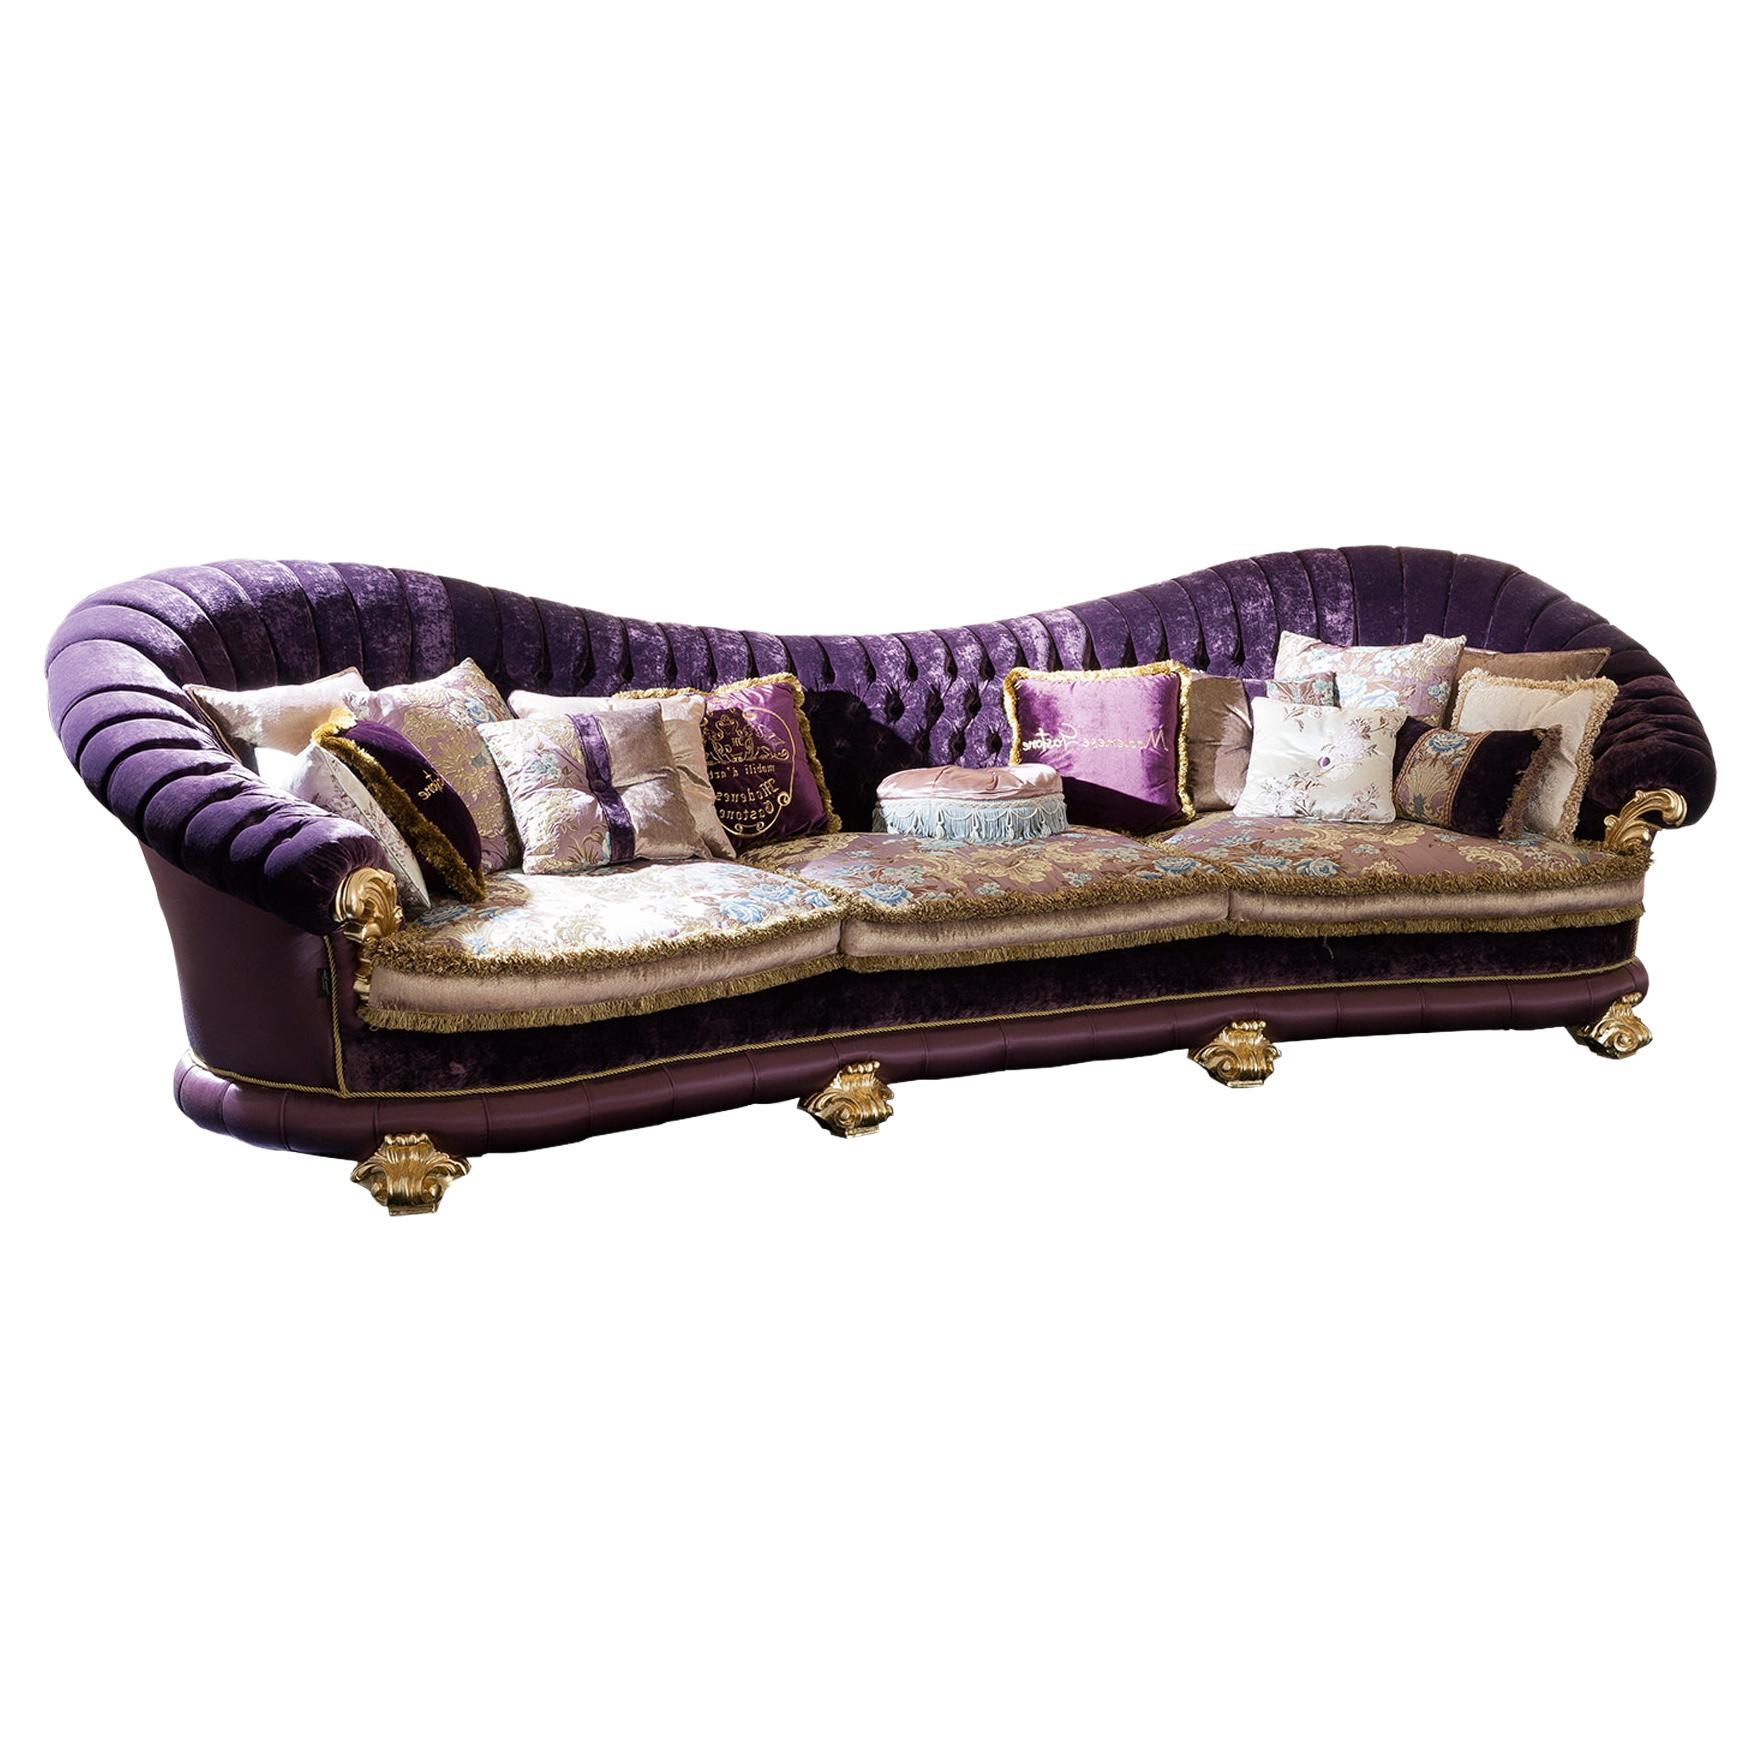 Princess Four Seater Sofa in Velvety Purple Capitonne Upholstery Made in Italy For Sale